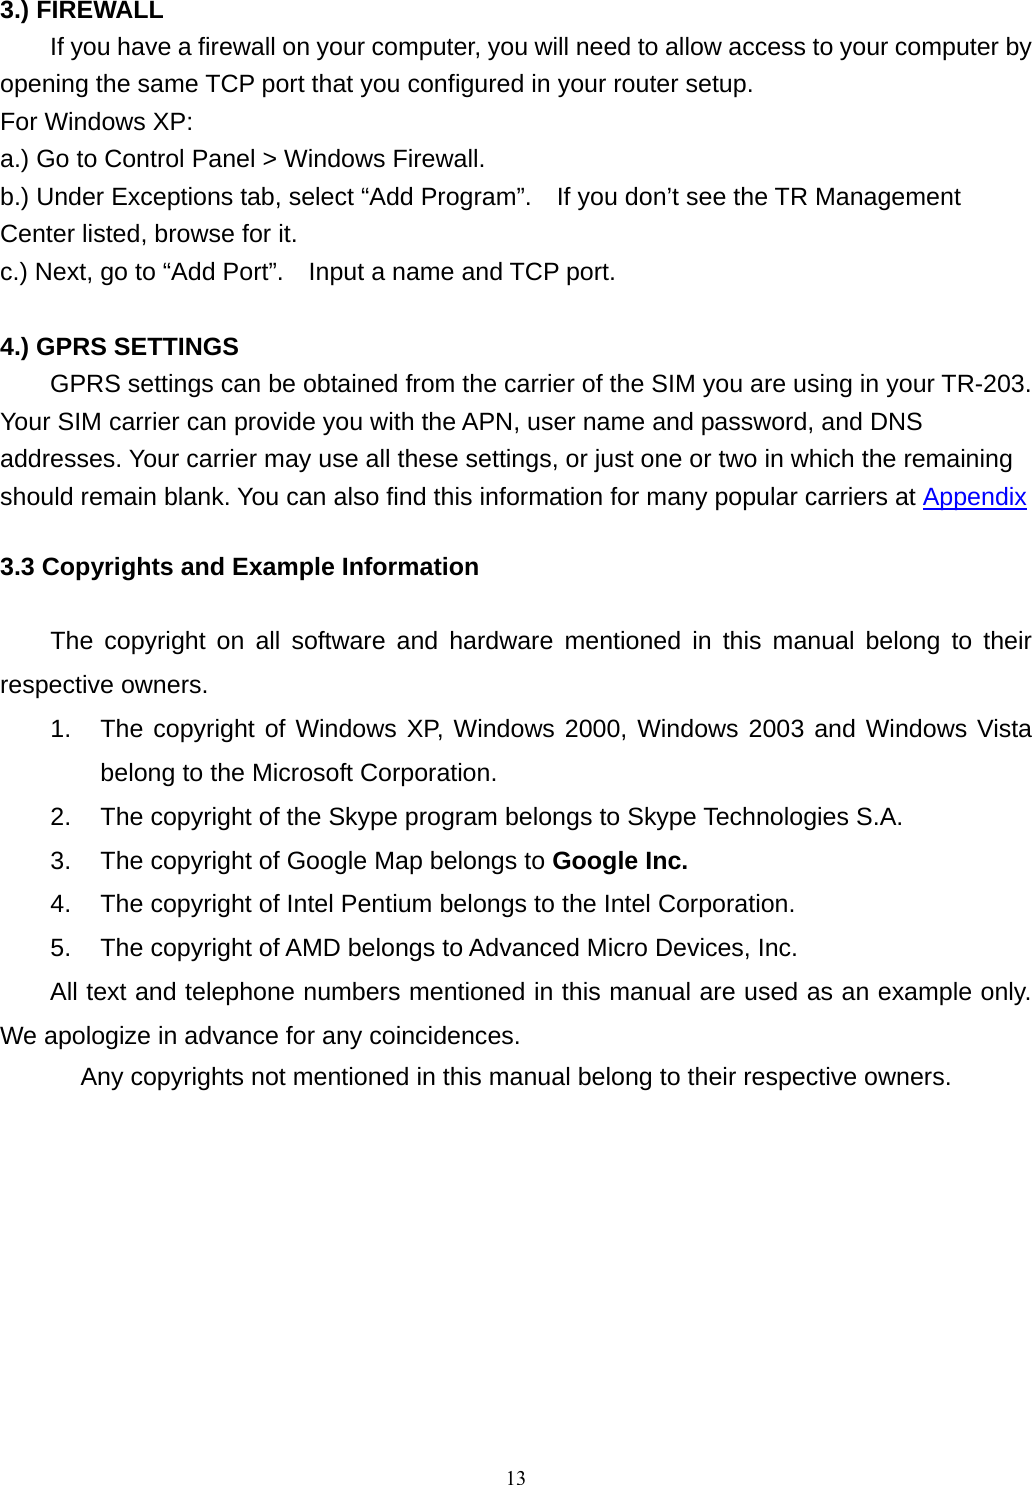 3.) FIREWALL   If you have a firewall on your computer, you will need to allow access to your computer by opening the same TCP port that you configured in your router setup.     For Windows XP: a.) Go to Control Panel &gt; Windows Firewall. b.) Under Exceptions tab, select “Add Program”.    If you don’t see the TR Management Center listed, browse for it. c.) Next, go to “Add Port”.    Input a name and TCP port.  4.) GPRS SETTINGS  GPRS settings can be obtained from the carrier of the SIM you are using in your TR-203.   Your SIM carrier can provide you with the APN, user name and password, and DNS addresses. Your carrier may use all these settings, or just one or two in which the remaining should remain blank. You can also find this information for many popular carriers at Appendix 3.3 Copyrights and Example Information  The copyright on all software and hardware mentioned in this manual belong to their respective owners.   1.  The copyright of Windows XP, Windows 2000, Windows 2003 and Windows Vista belong to the Microsoft Corporation.   2.  The copyright of the Skype program belongs to Skype Technologies S.A.   3.  The copyright of Google Map belongs to Google Inc.  4.  The copyright of Intel Pentium belongs to the Intel Corporation.   5.  The copyright of AMD belongs to Advanced Micro Devices, Inc. All text and telephone numbers mentioned in this manual are used as an example only. We apologize in advance for any coincidences.   Any copyrights not mentioned in this manual belong to their respective owners.  13